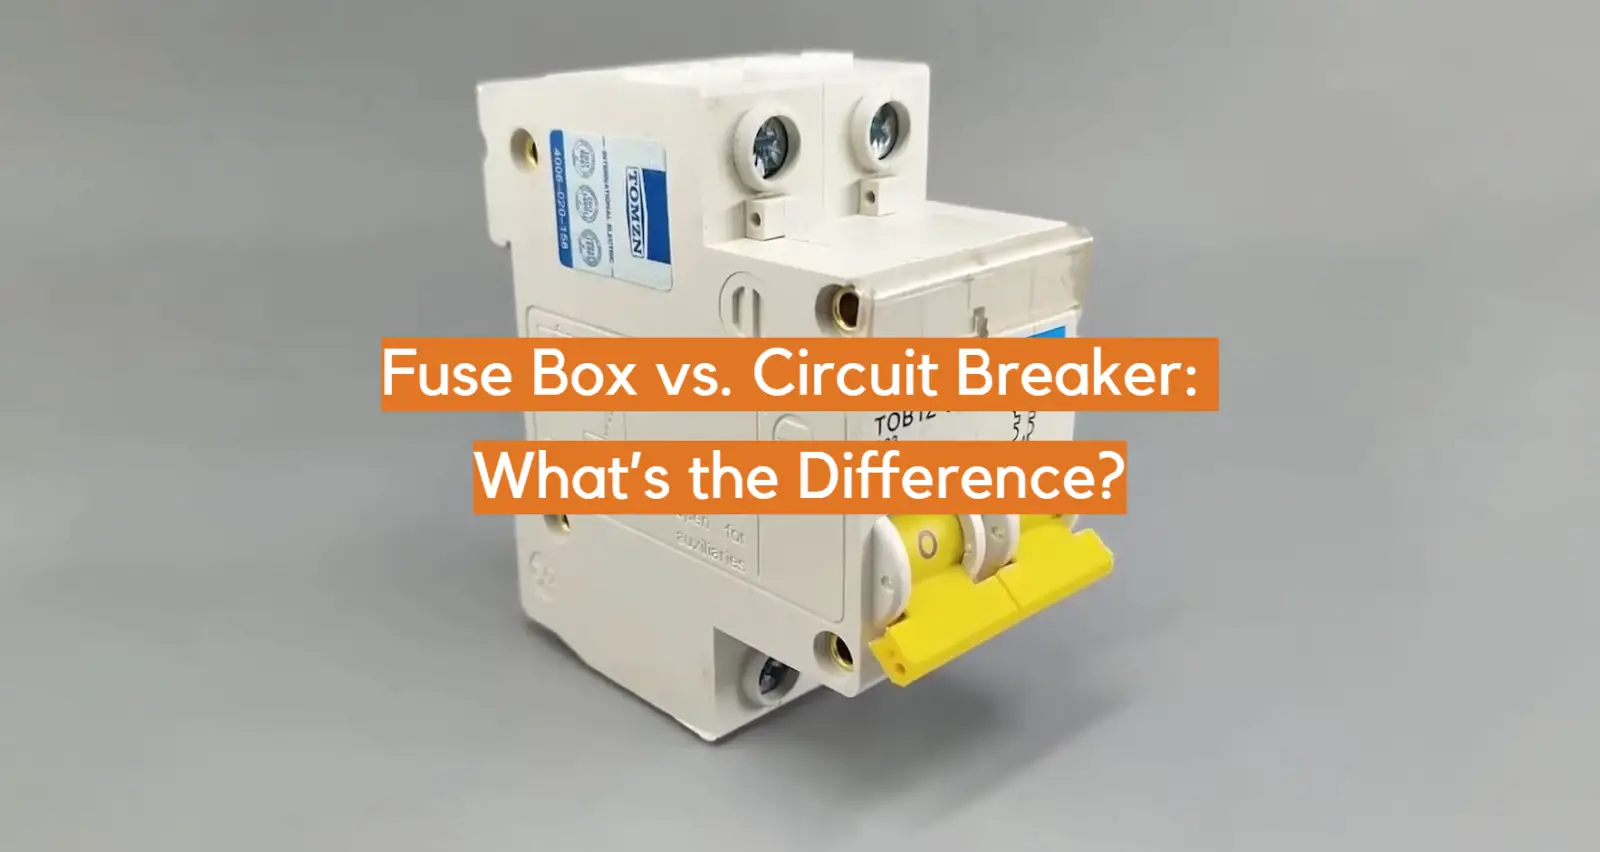 Fuse Box vs. Circuit Breaker: What’s the Difference?